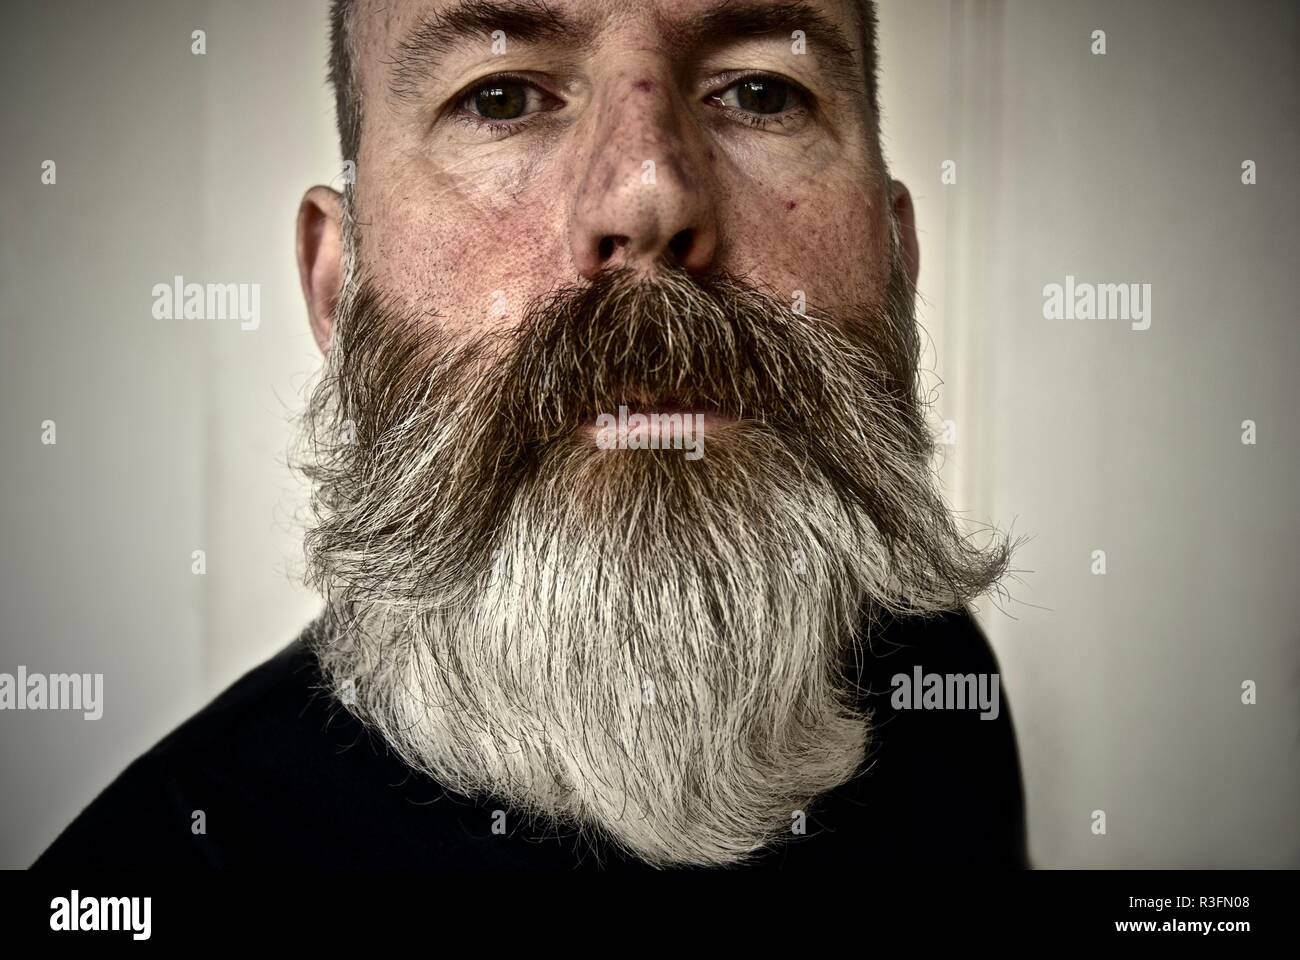 Middle aged man with large grey hipster beard Stock Photo